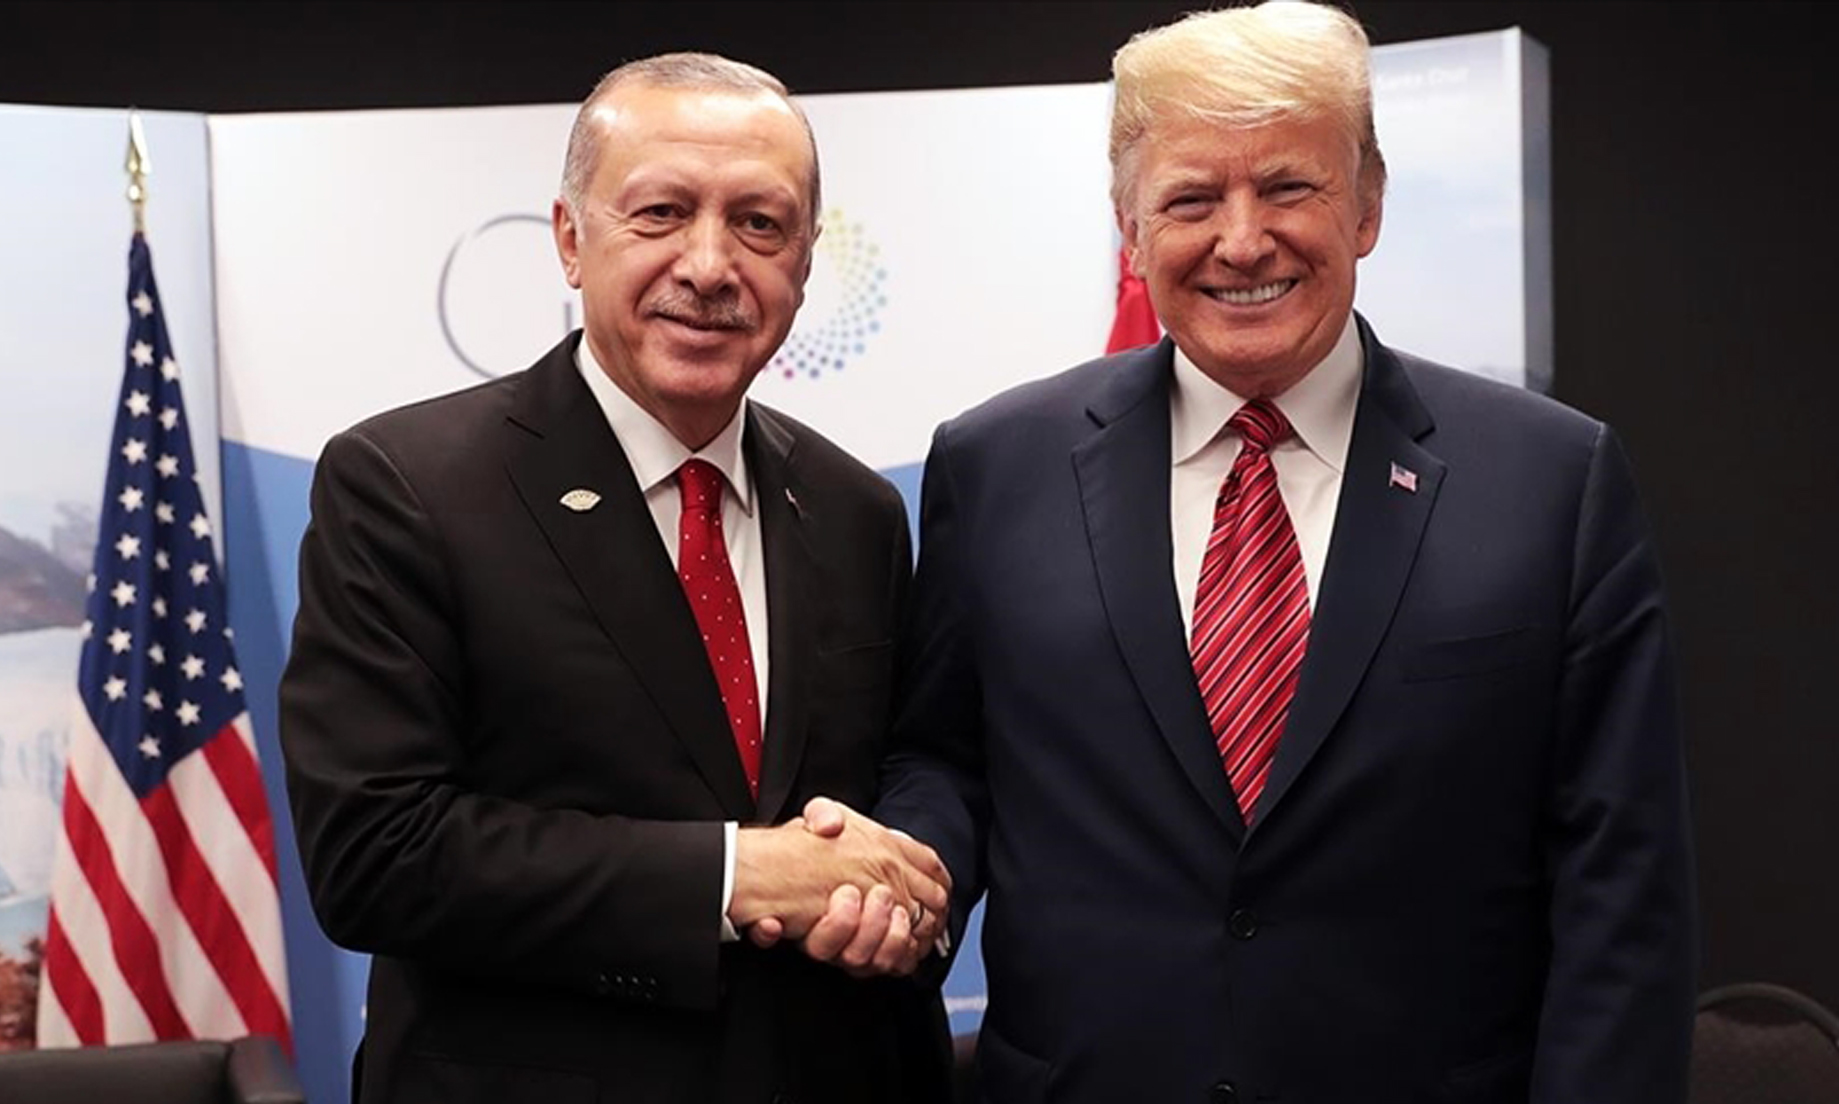 Turkey’s Erdogan, Trump discussed U.S. withdrawal from Syria in phone call